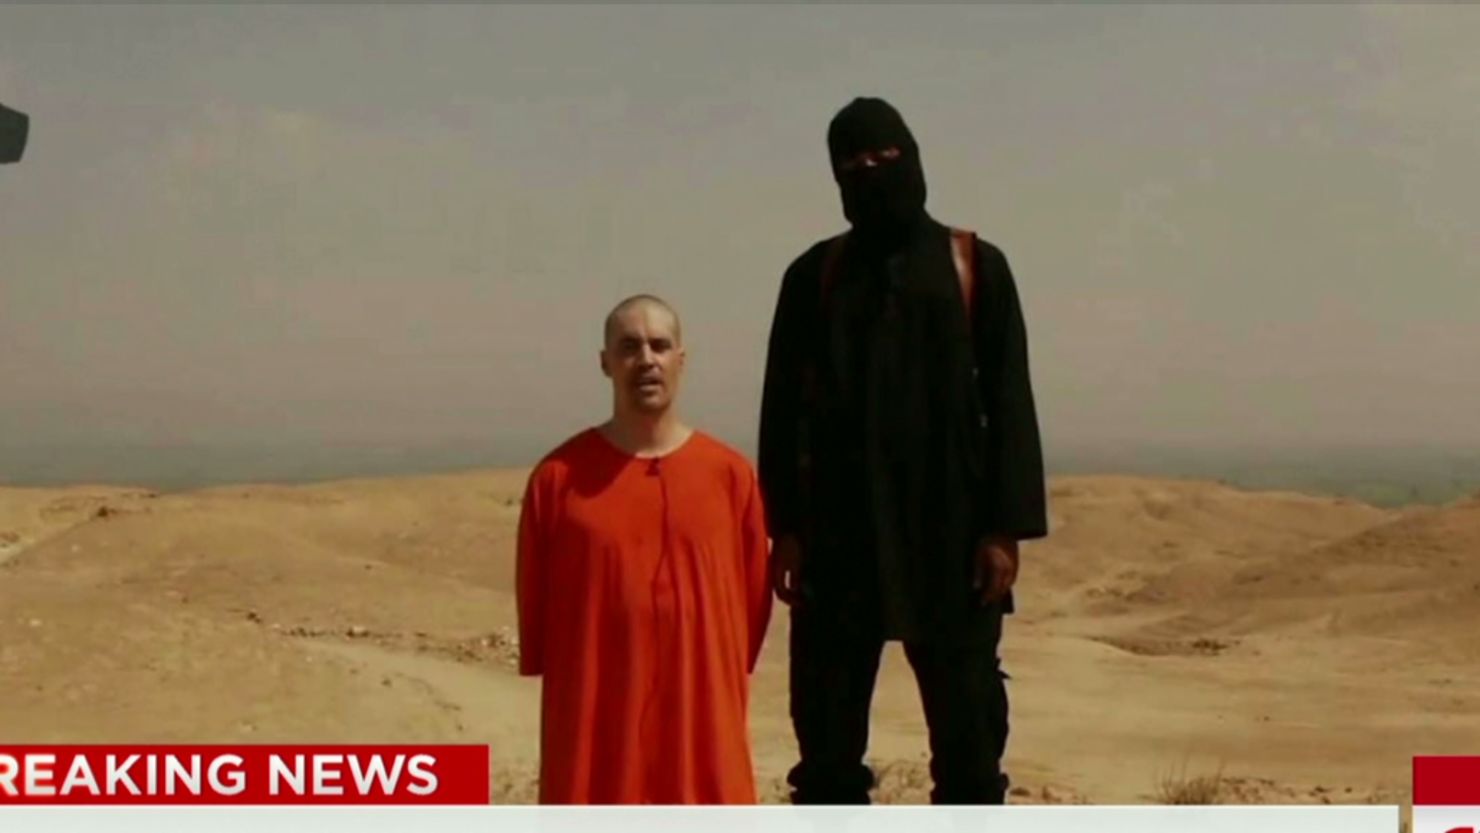 Labeled as a "Message to America," the video of U.S. journalist James Foley's execution has caused shockwaves in the West.